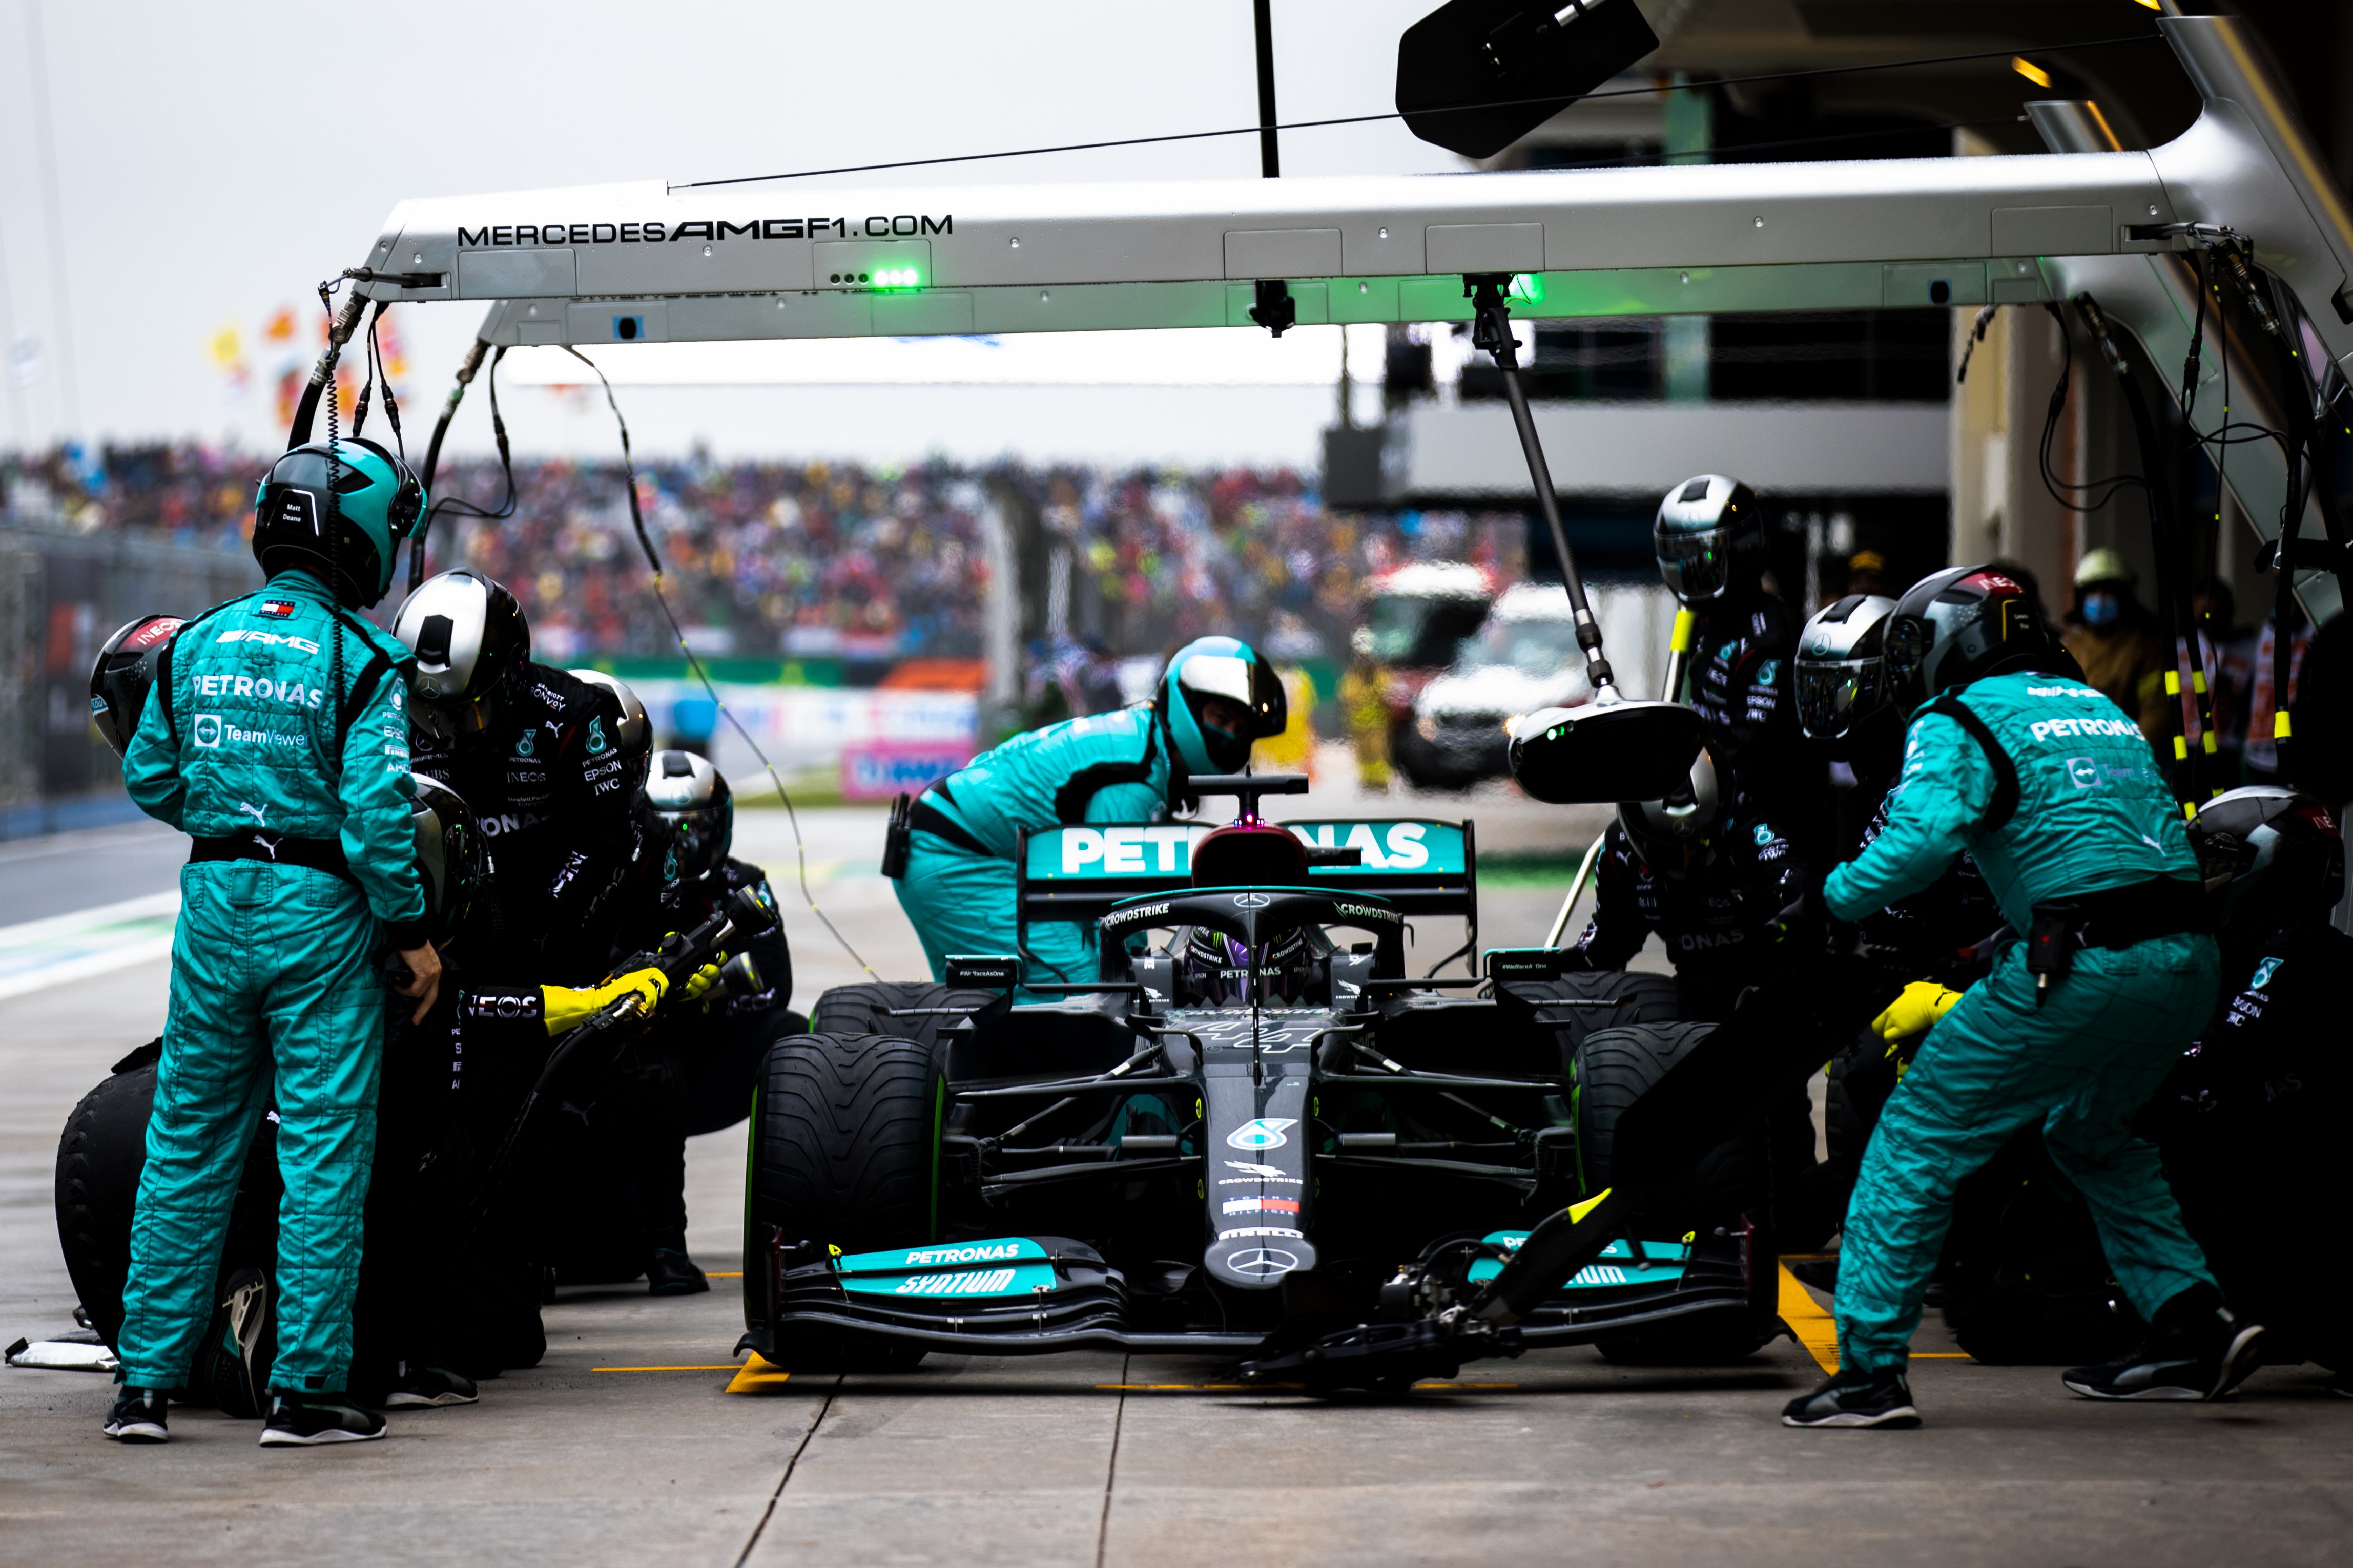 Mercedes made the decision to call Lewis Hamilton into the pits